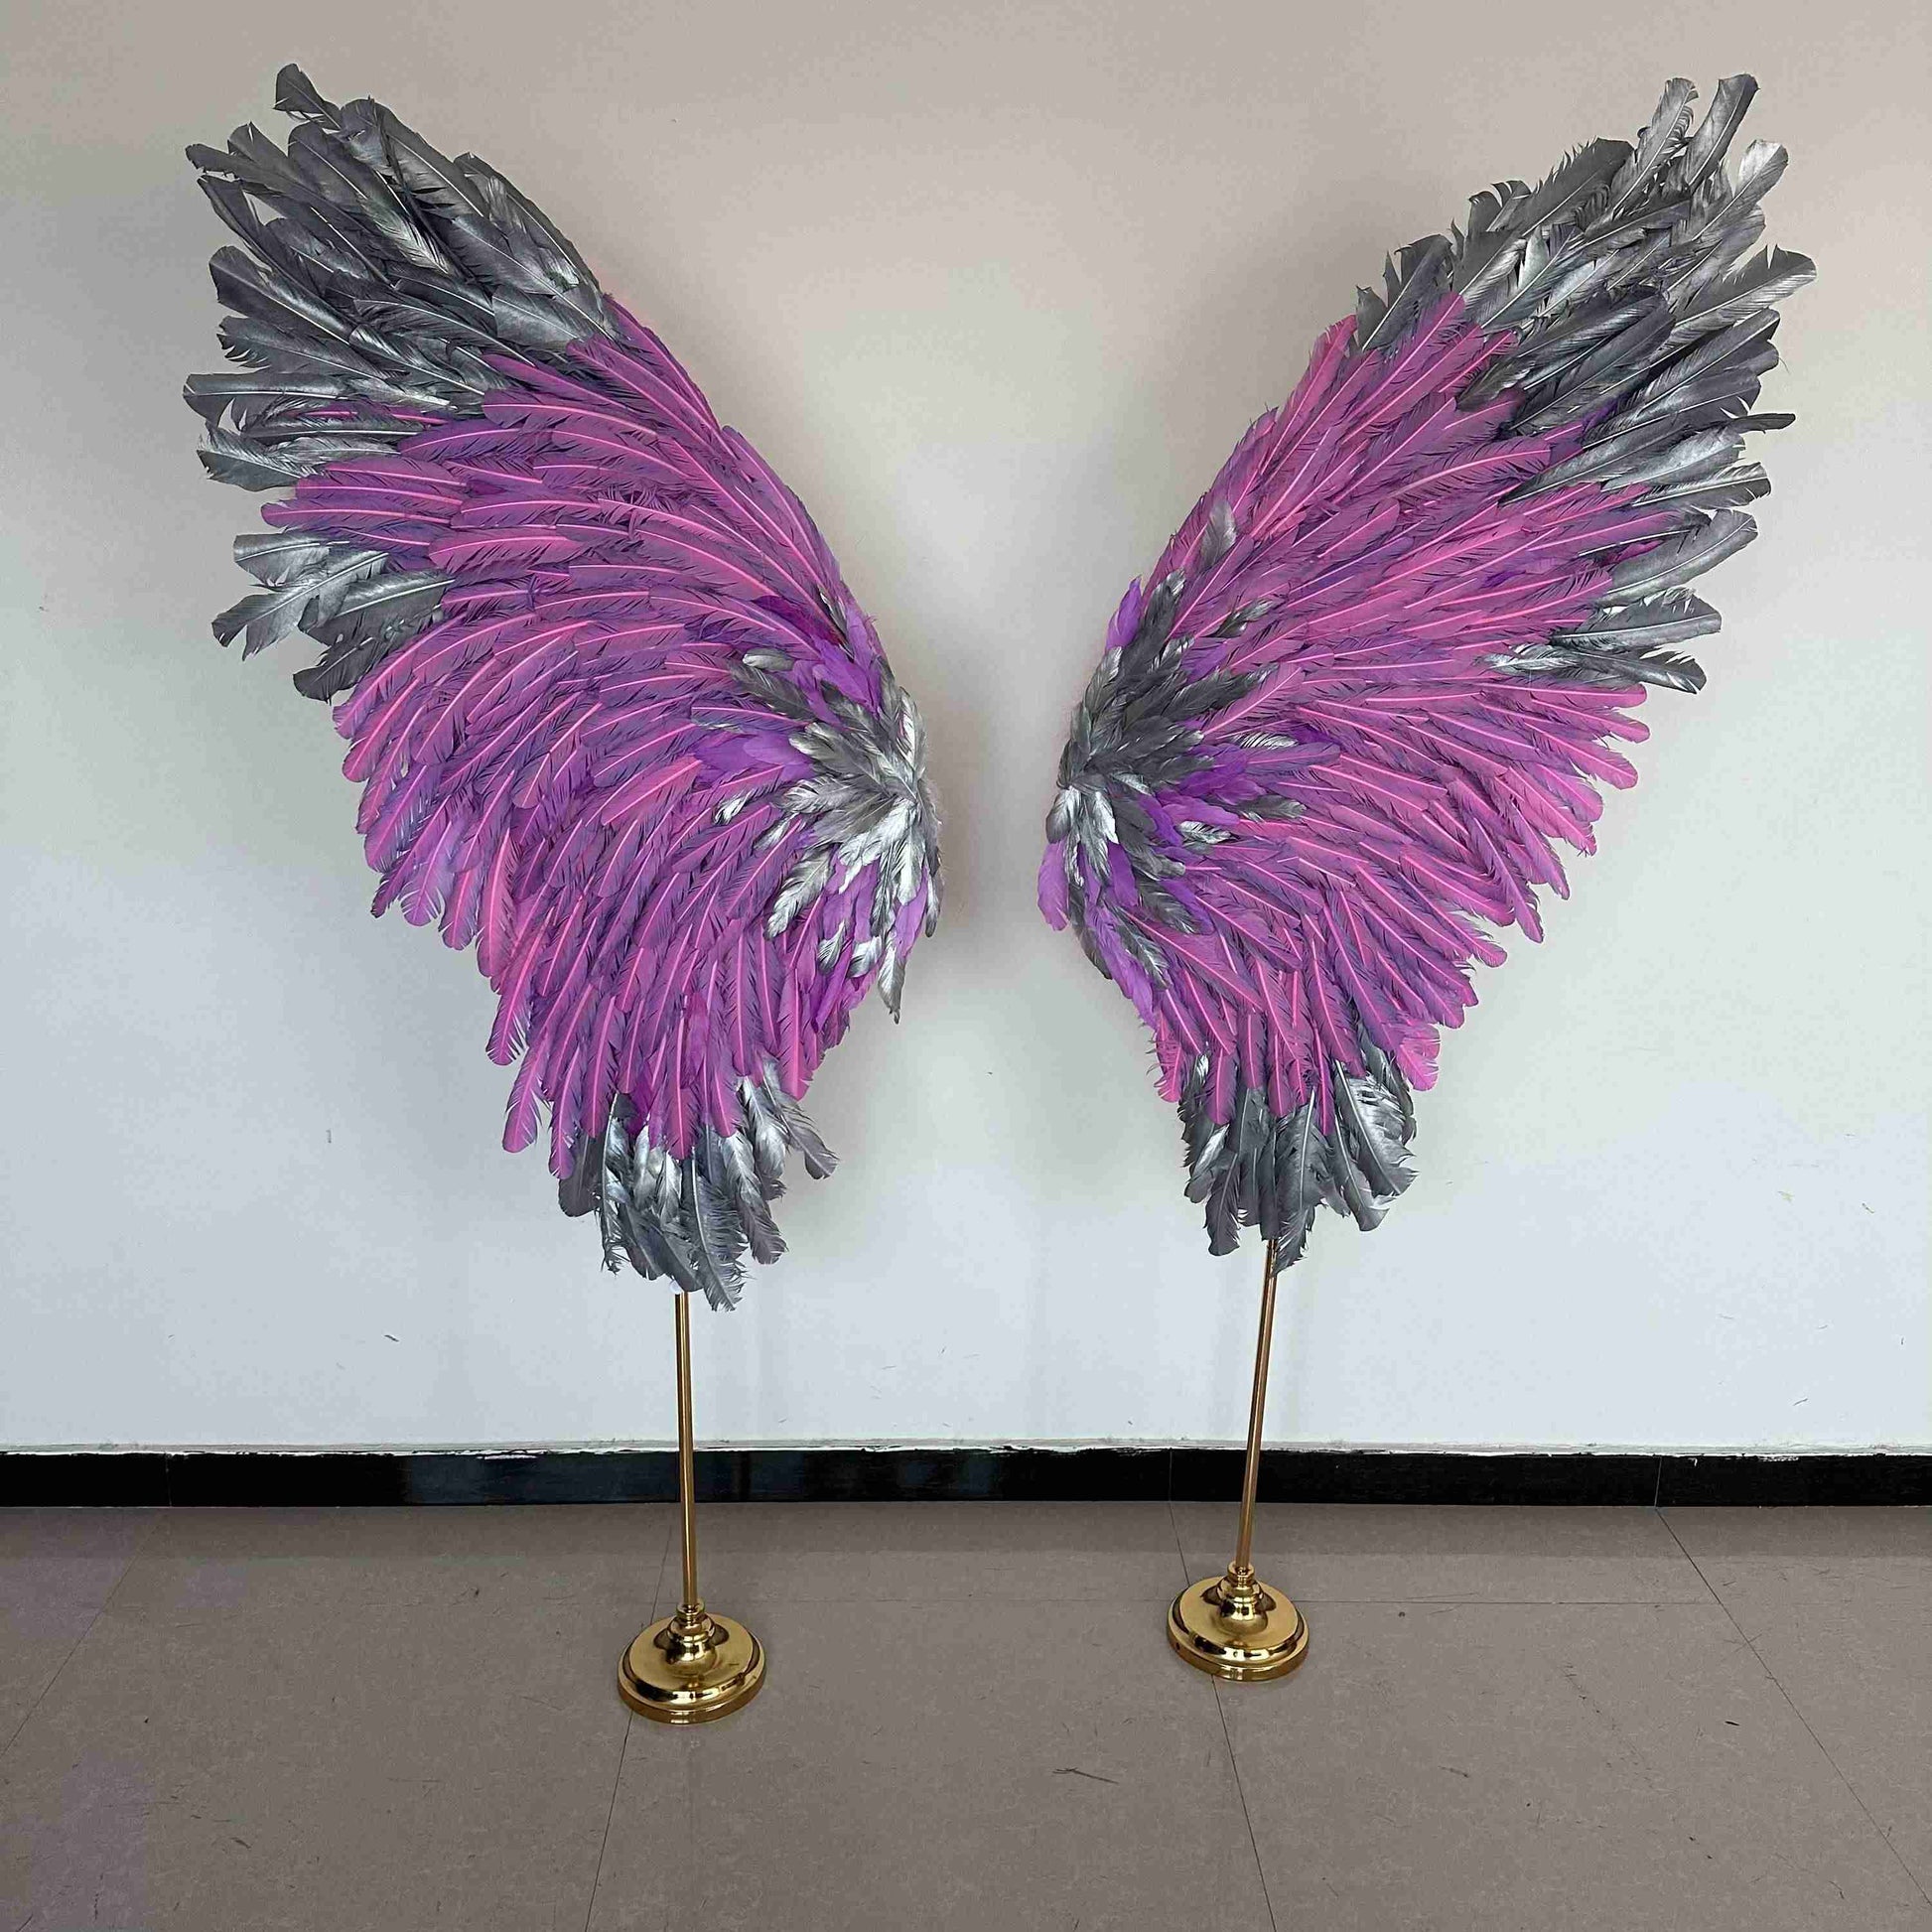 Our silver pink angel wings on poles from the front. Made from goose feathers. Wings for decoration. Suitable for restaurant, cafe, night club, event decorations.